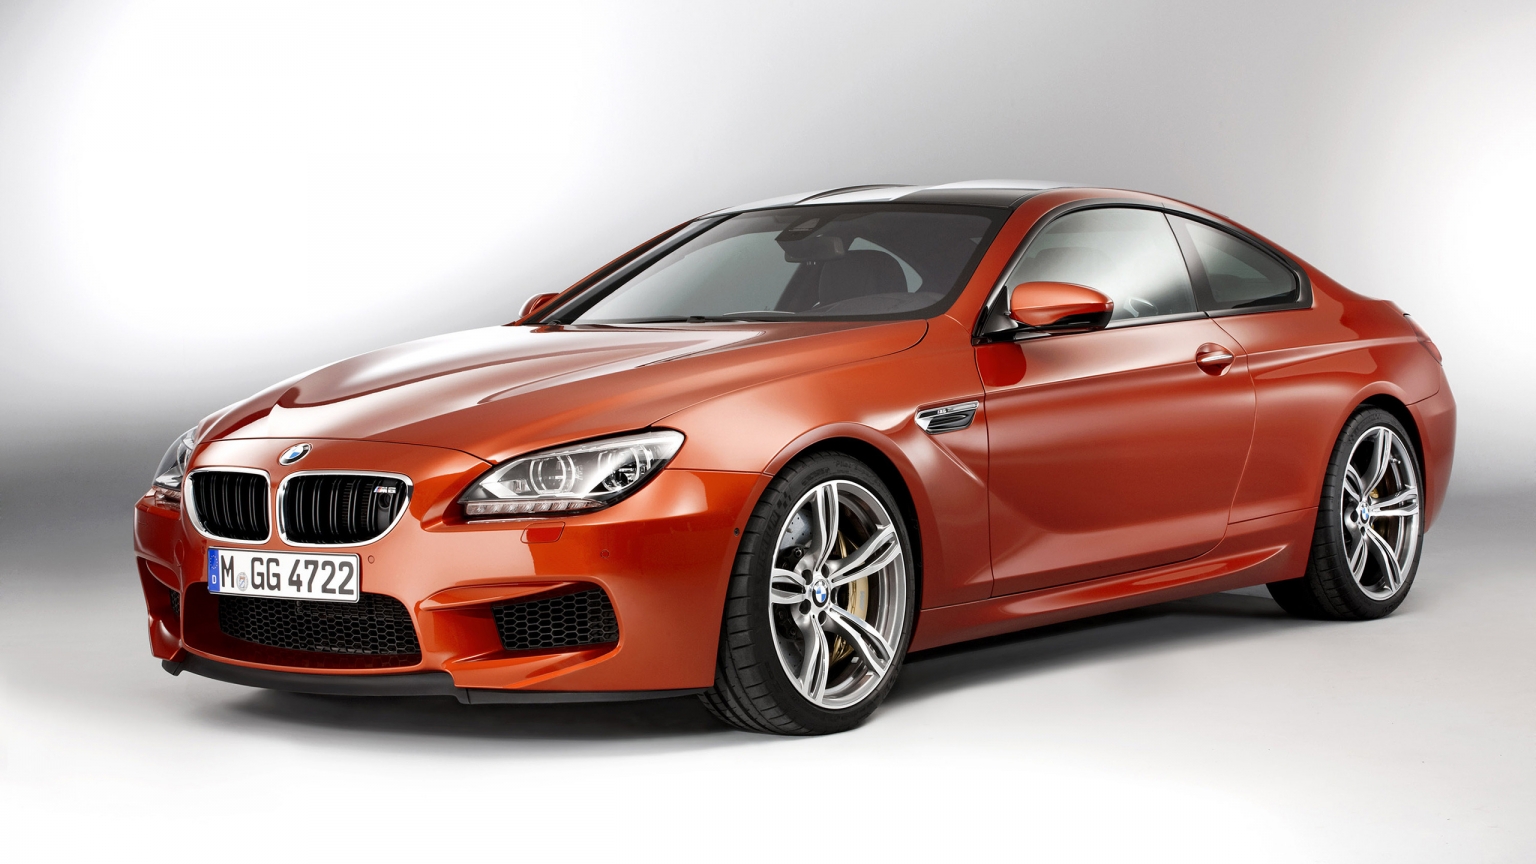 2013 BMW M6 Coupe Studio for 1536 x 864 HDTV resolution